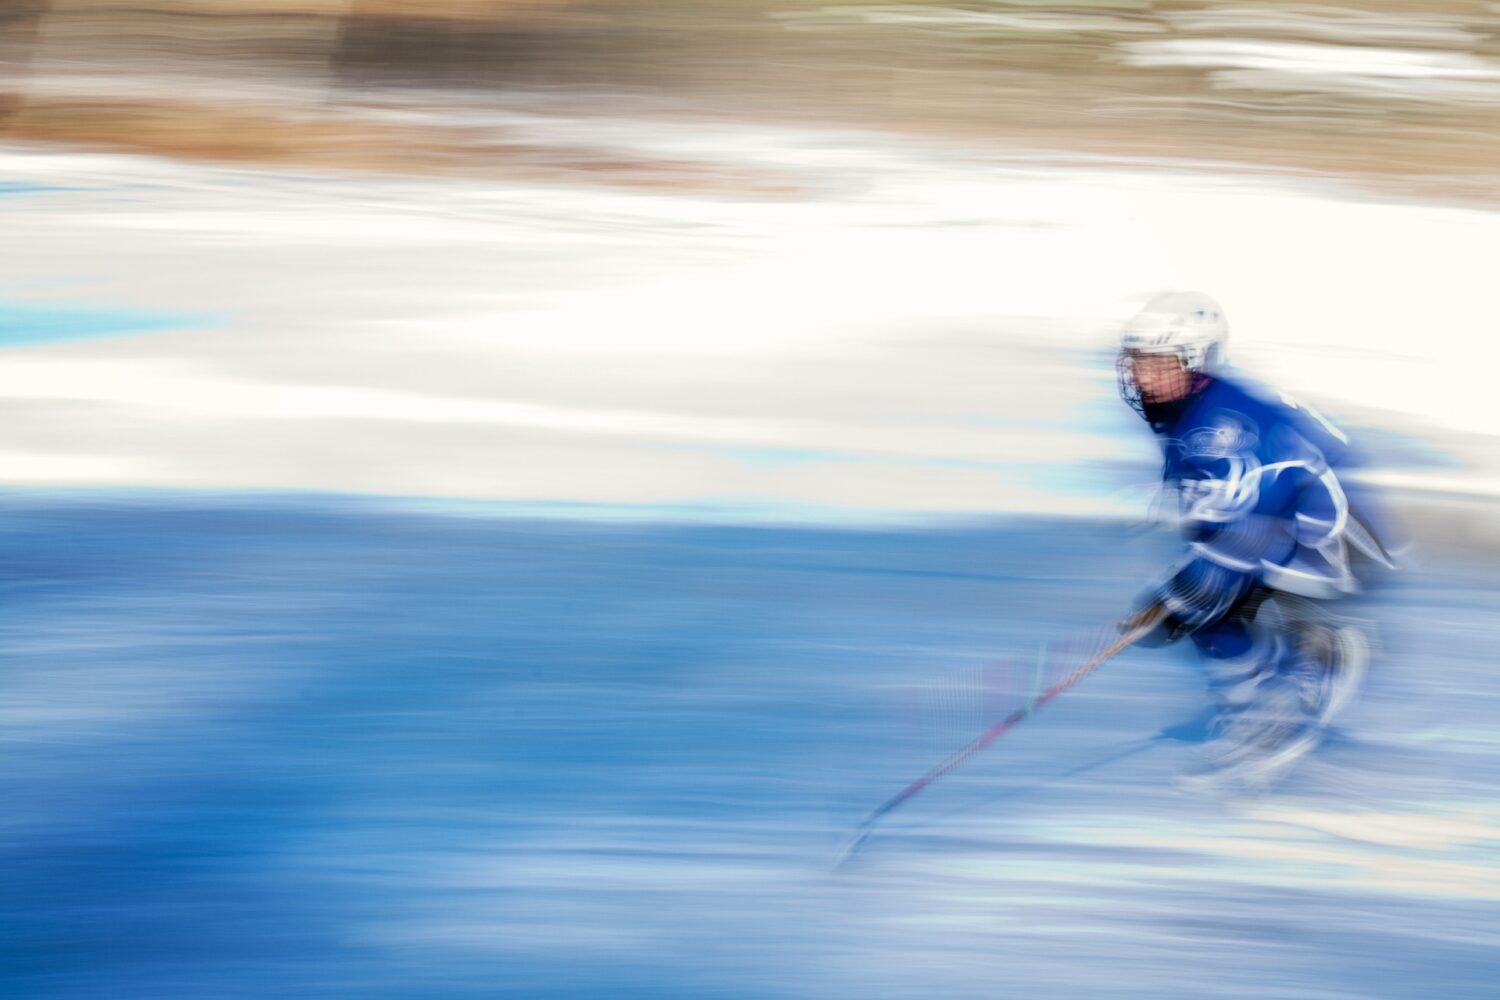 Artistically blurry image of an athlete playing ice hockey on a rink while wearing a blue jersey and helmet